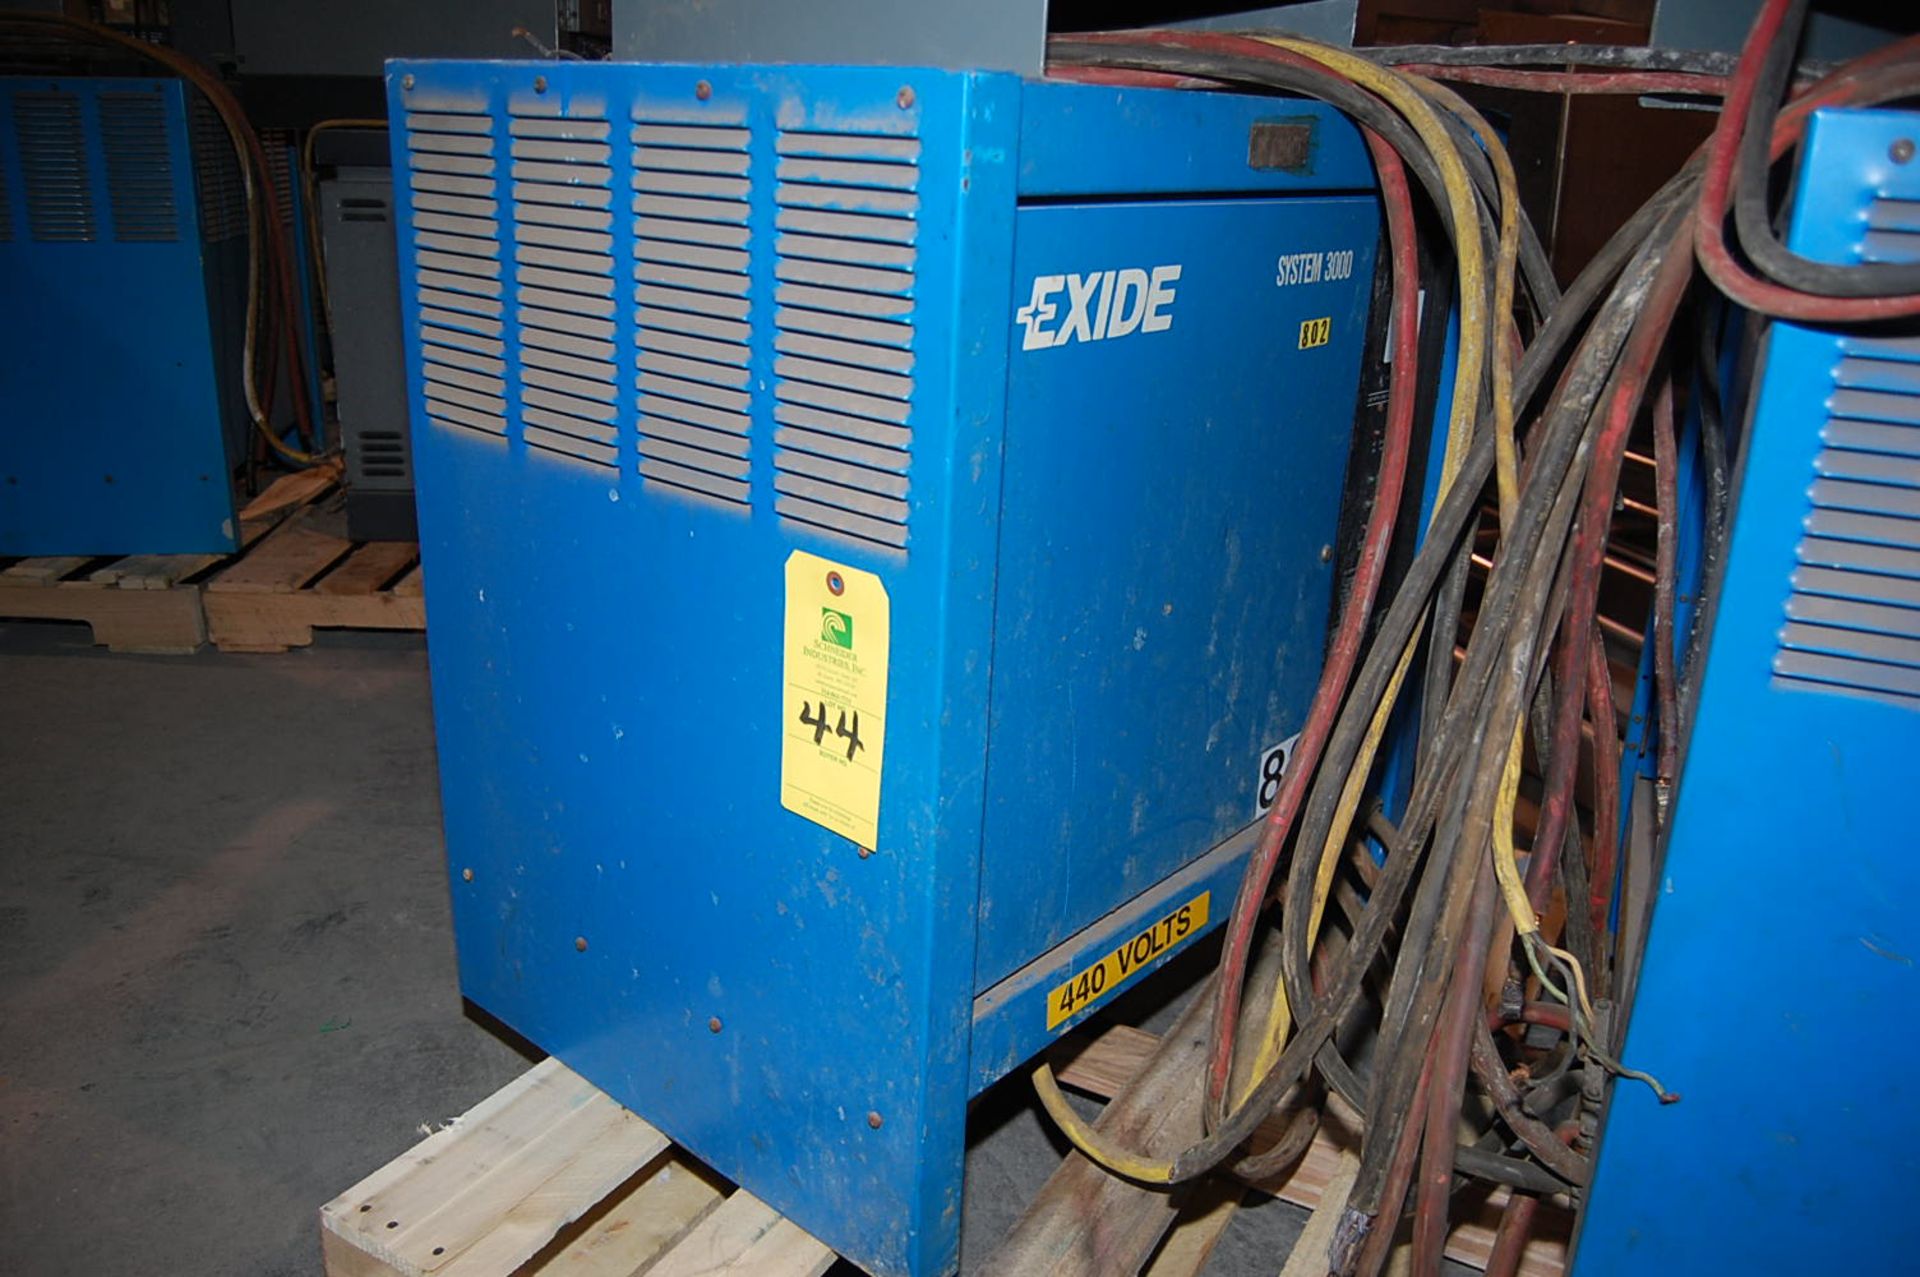 Exide System 3000 Electric Battery Charger, Rated 6 Cell/12 Volt Rigging fee: $25